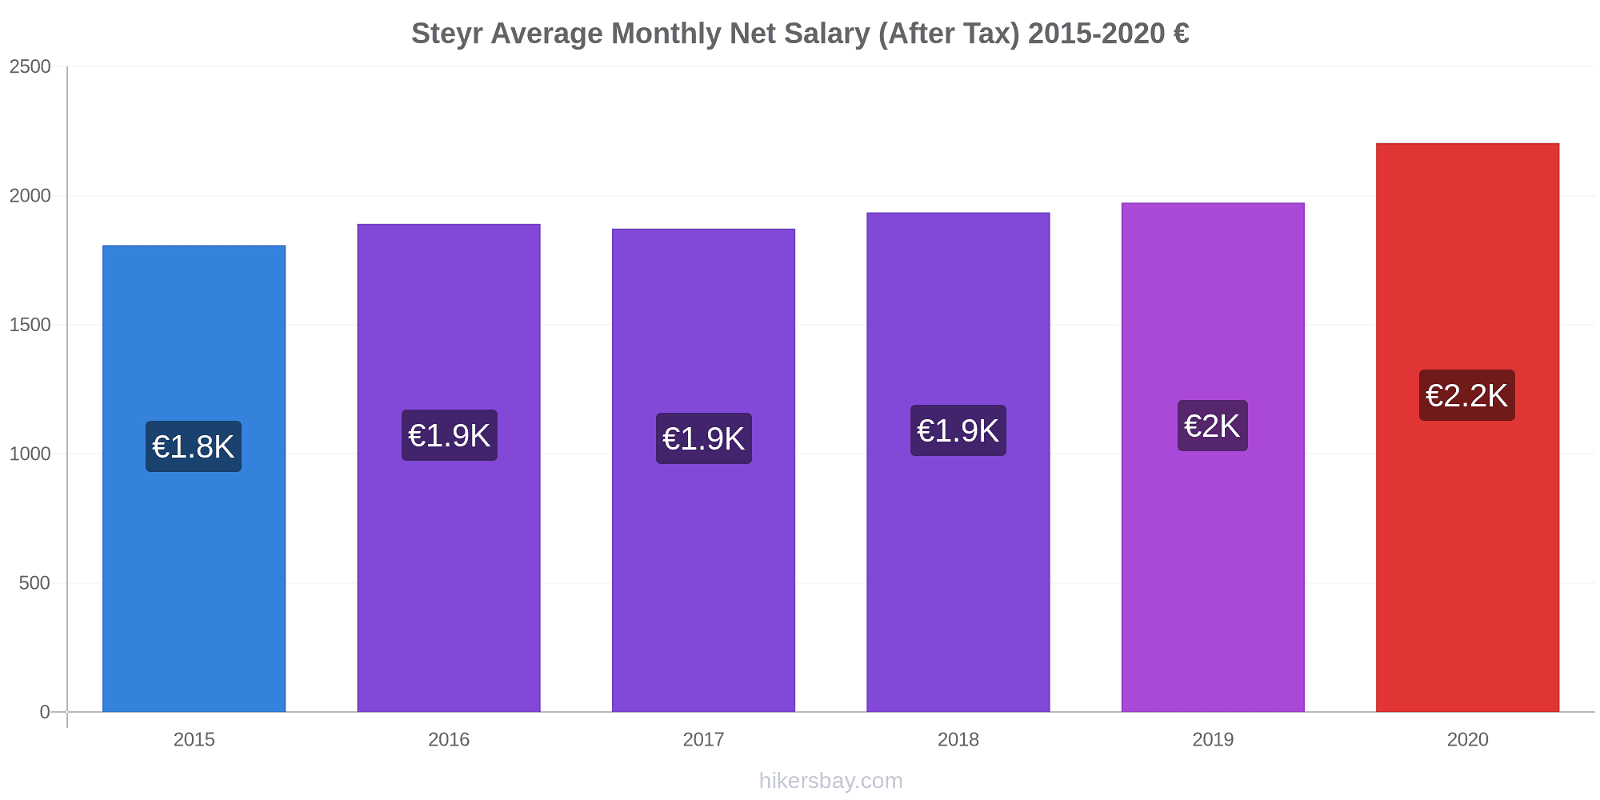 Steyr price changes Average Monthly Net Salary (After Tax) hikersbay.com